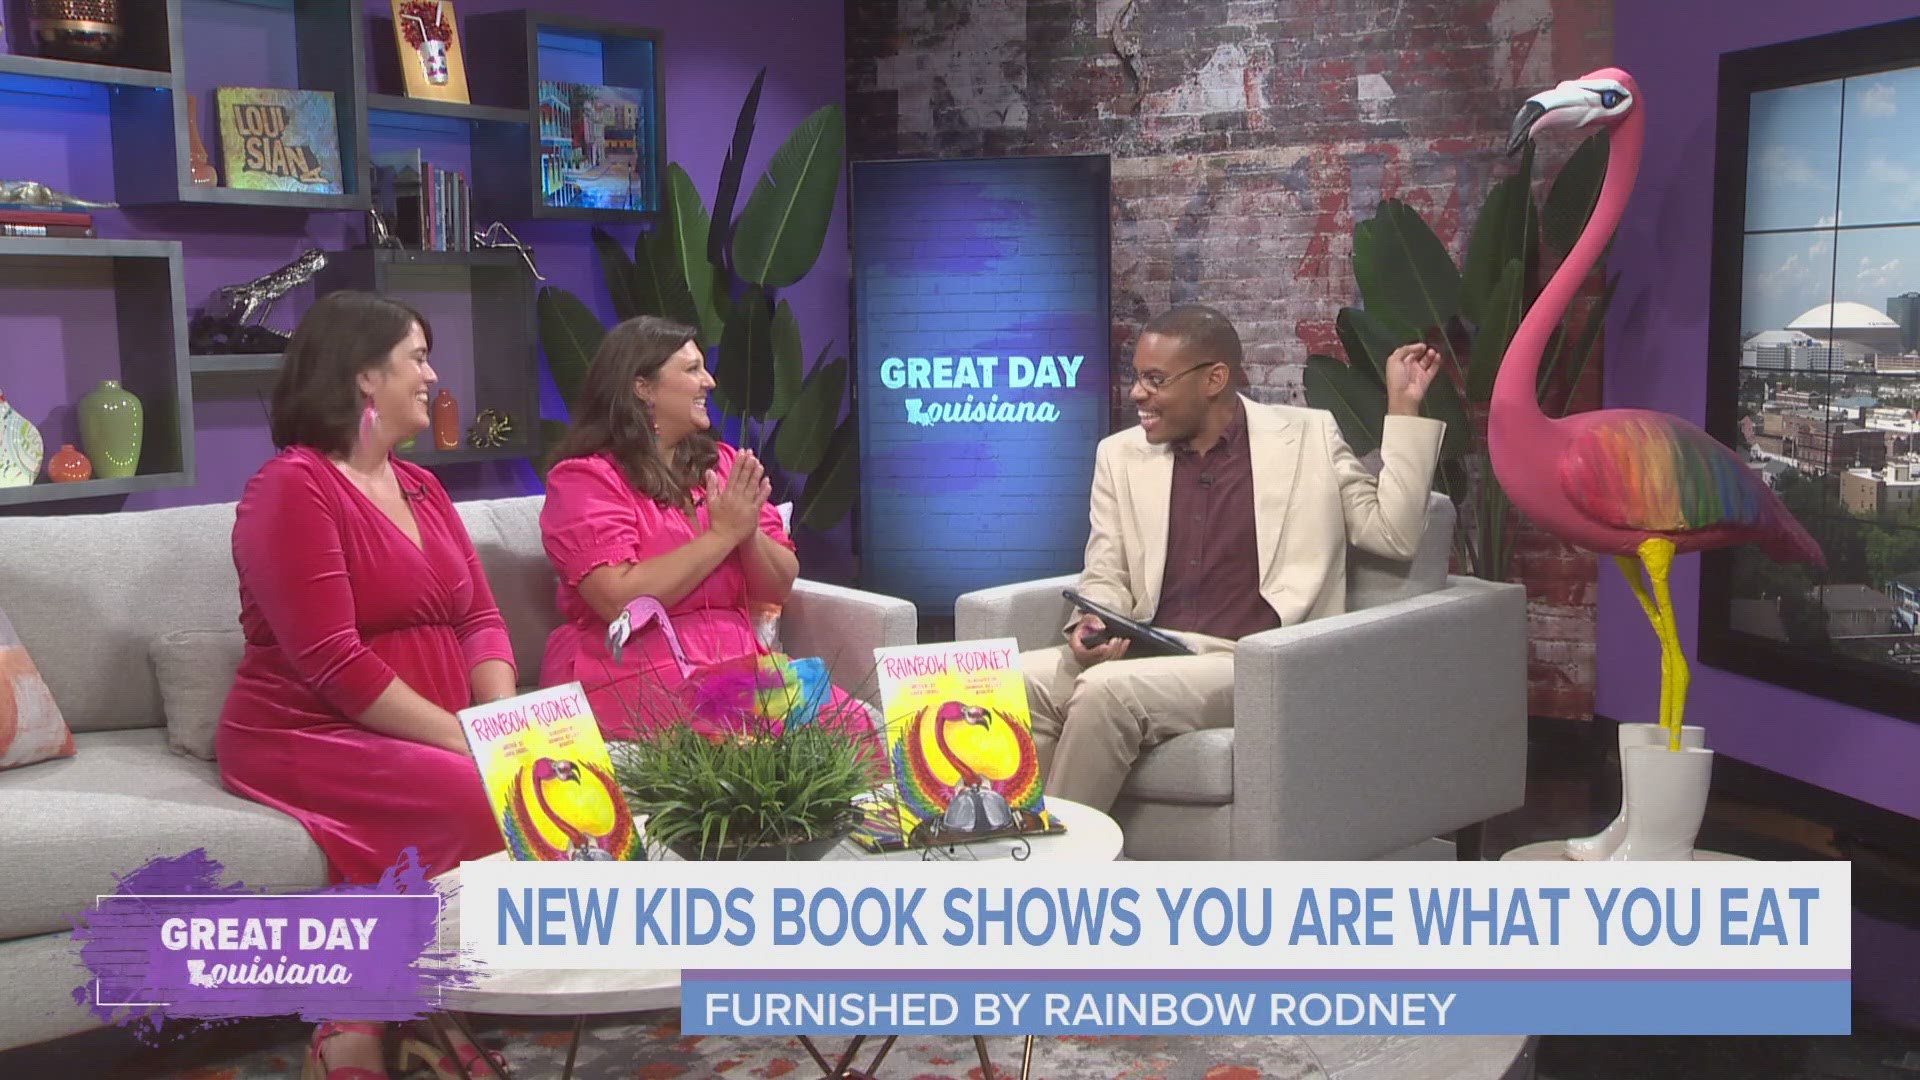 The author and illustrator of a new kid's book "Rainbow Rodney" talk about how they used inspiration from around New Orleans for their book.